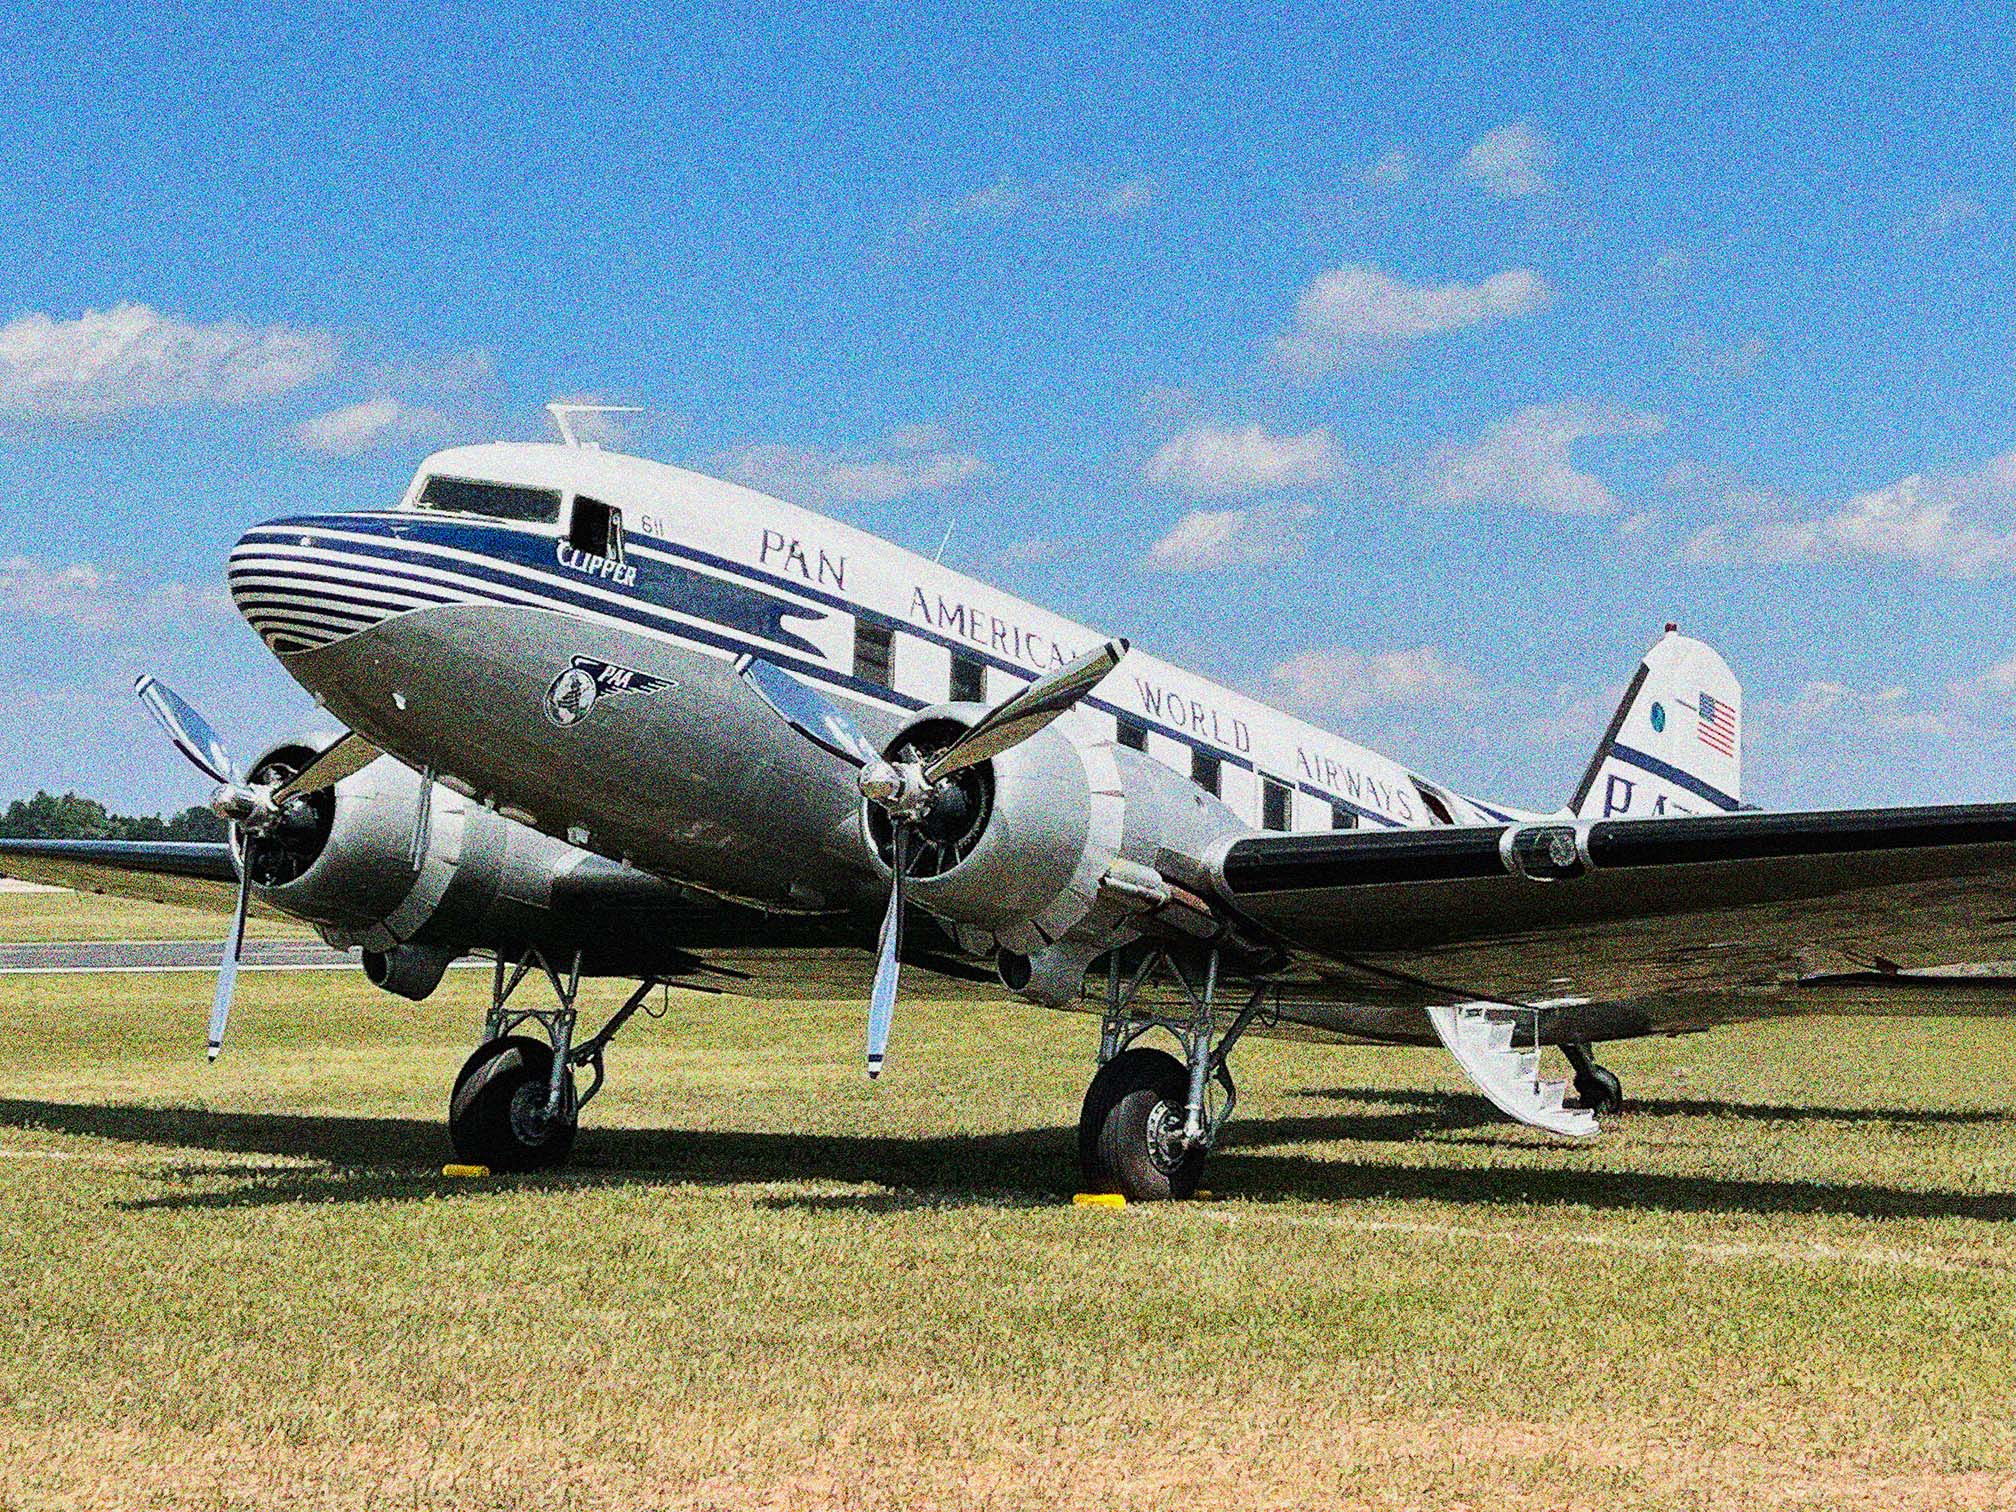 Artistic photo of DC-3 airplane